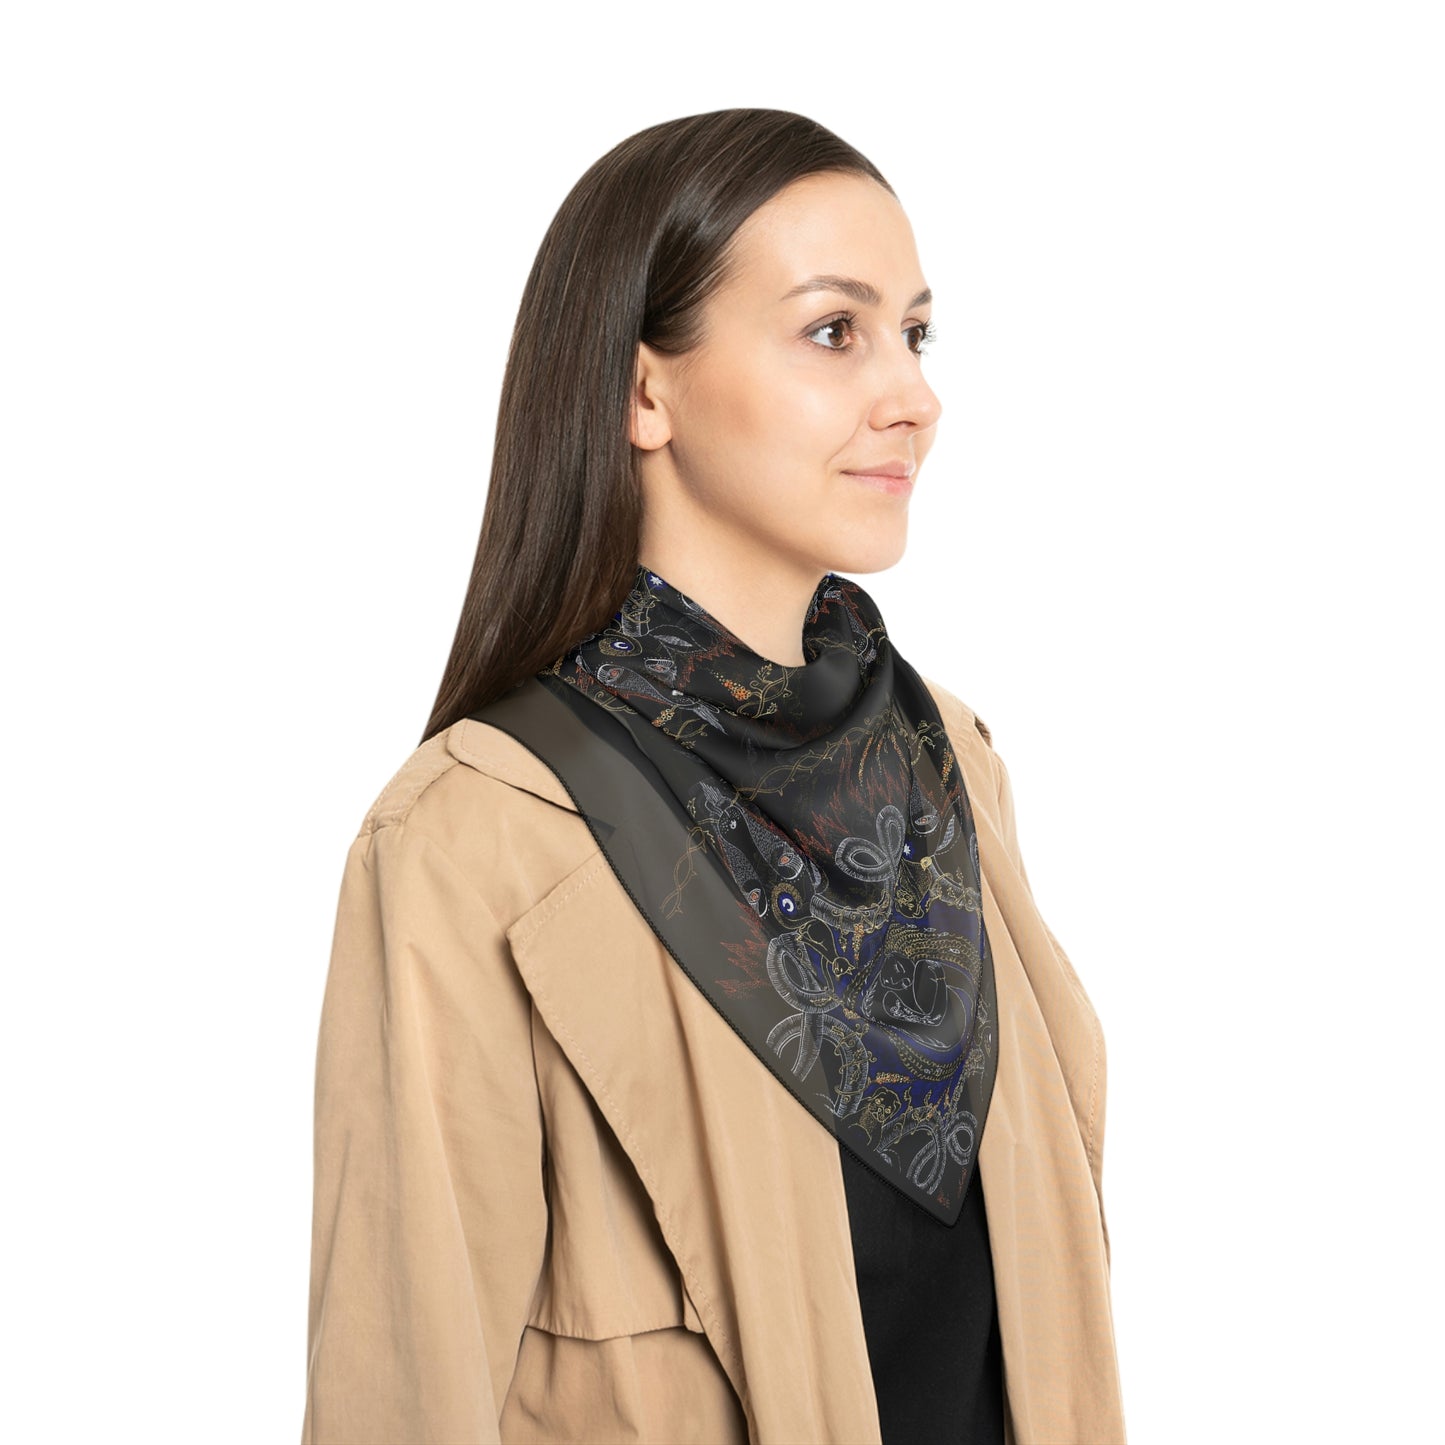 Chinese Years Zodiac Sign Poly Scarf (Goat)